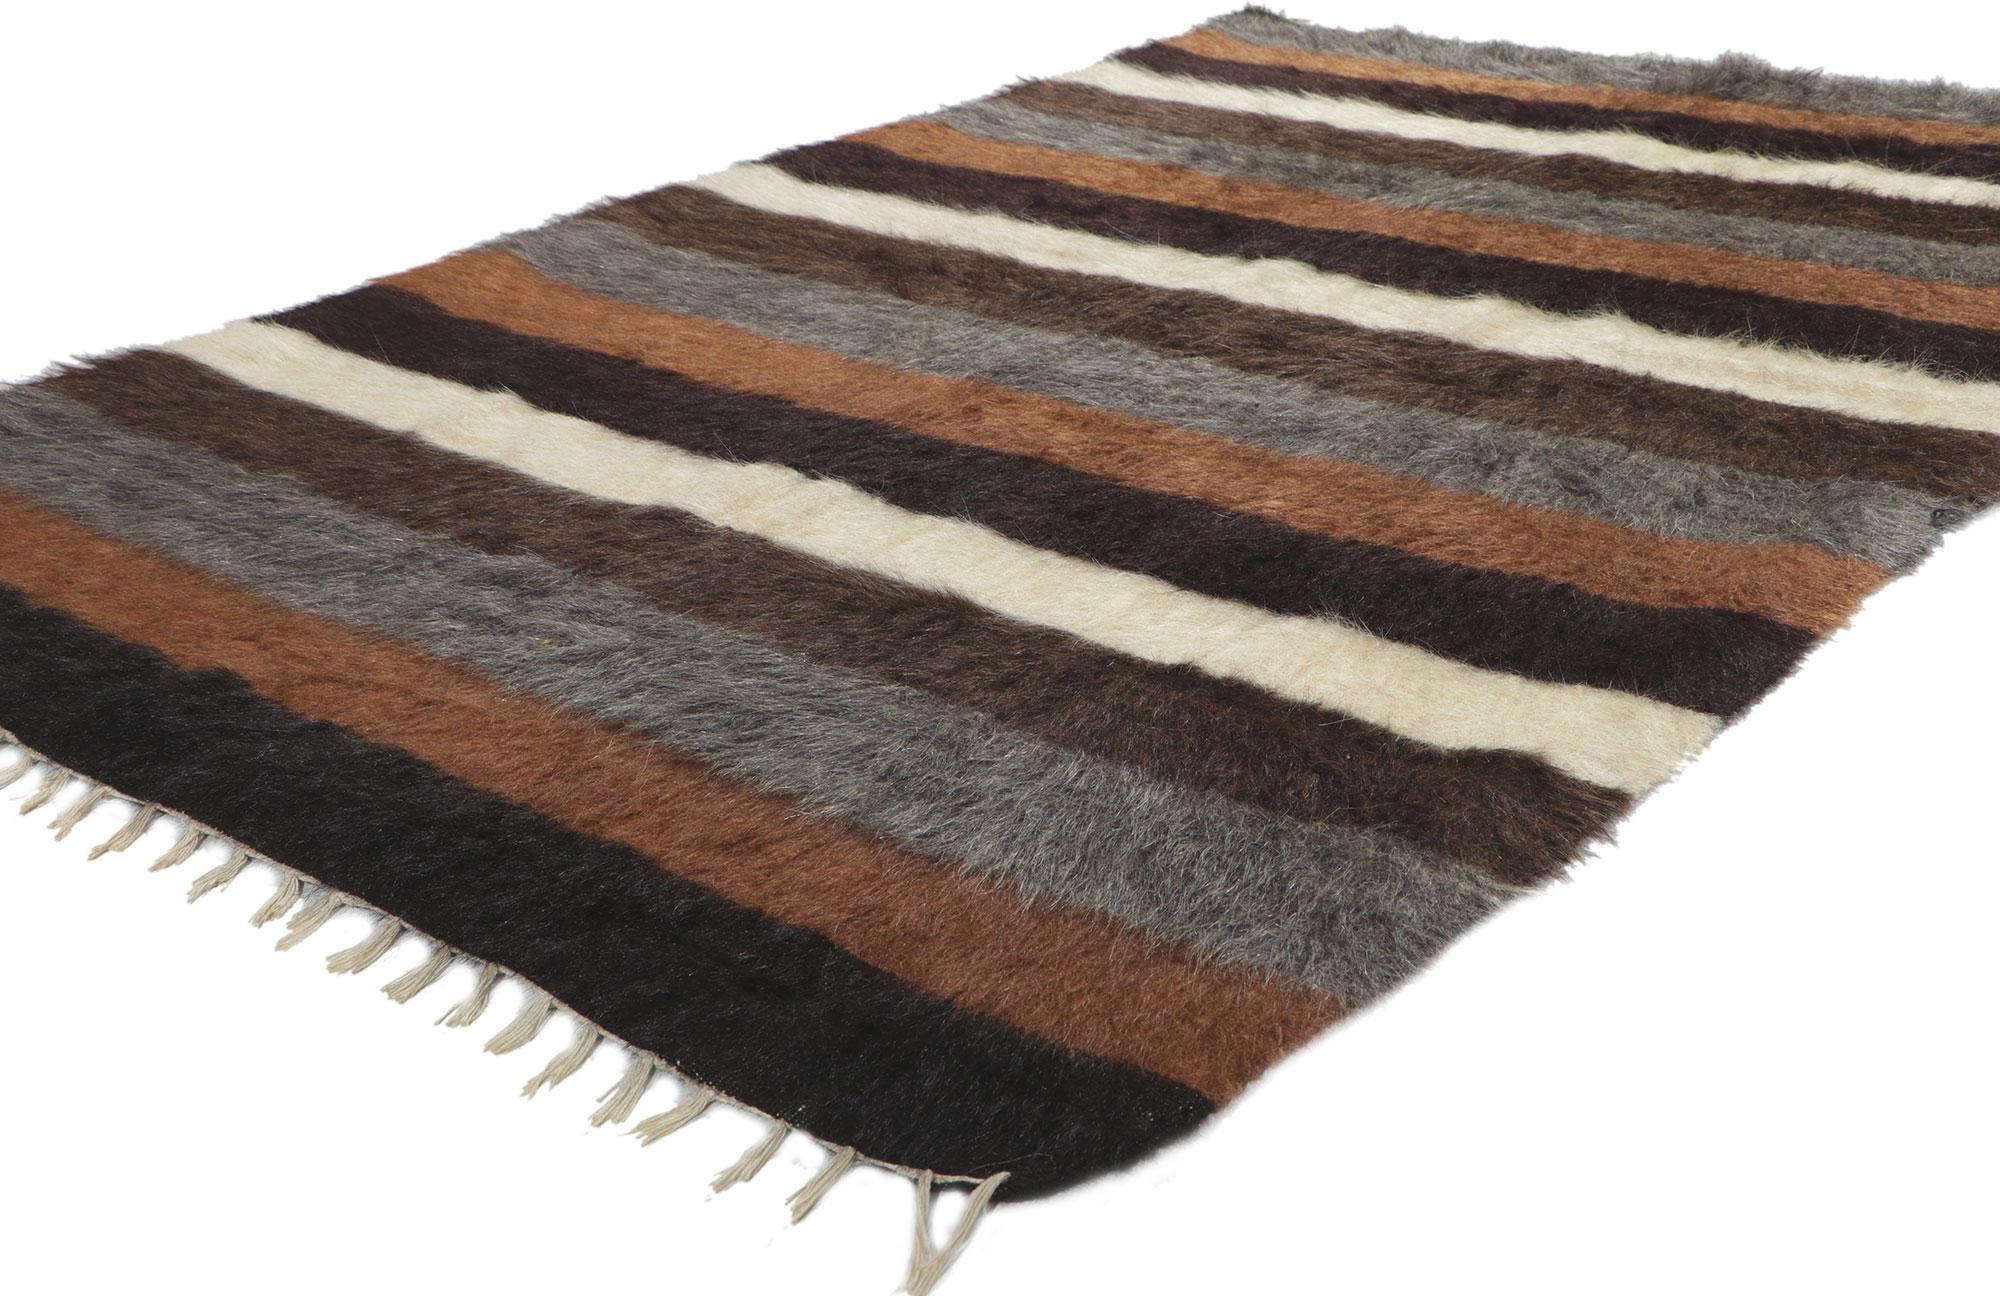 53856 Vintage Turkish Angora Wool Blanket Kilim Rug, 04'05 x 06'05. With its shaggy pile, incredible detail and texture, this handwoven Turkish angora kilim rug is a captivating vision of woven beauty. The eye-catching striped pattern and earthy